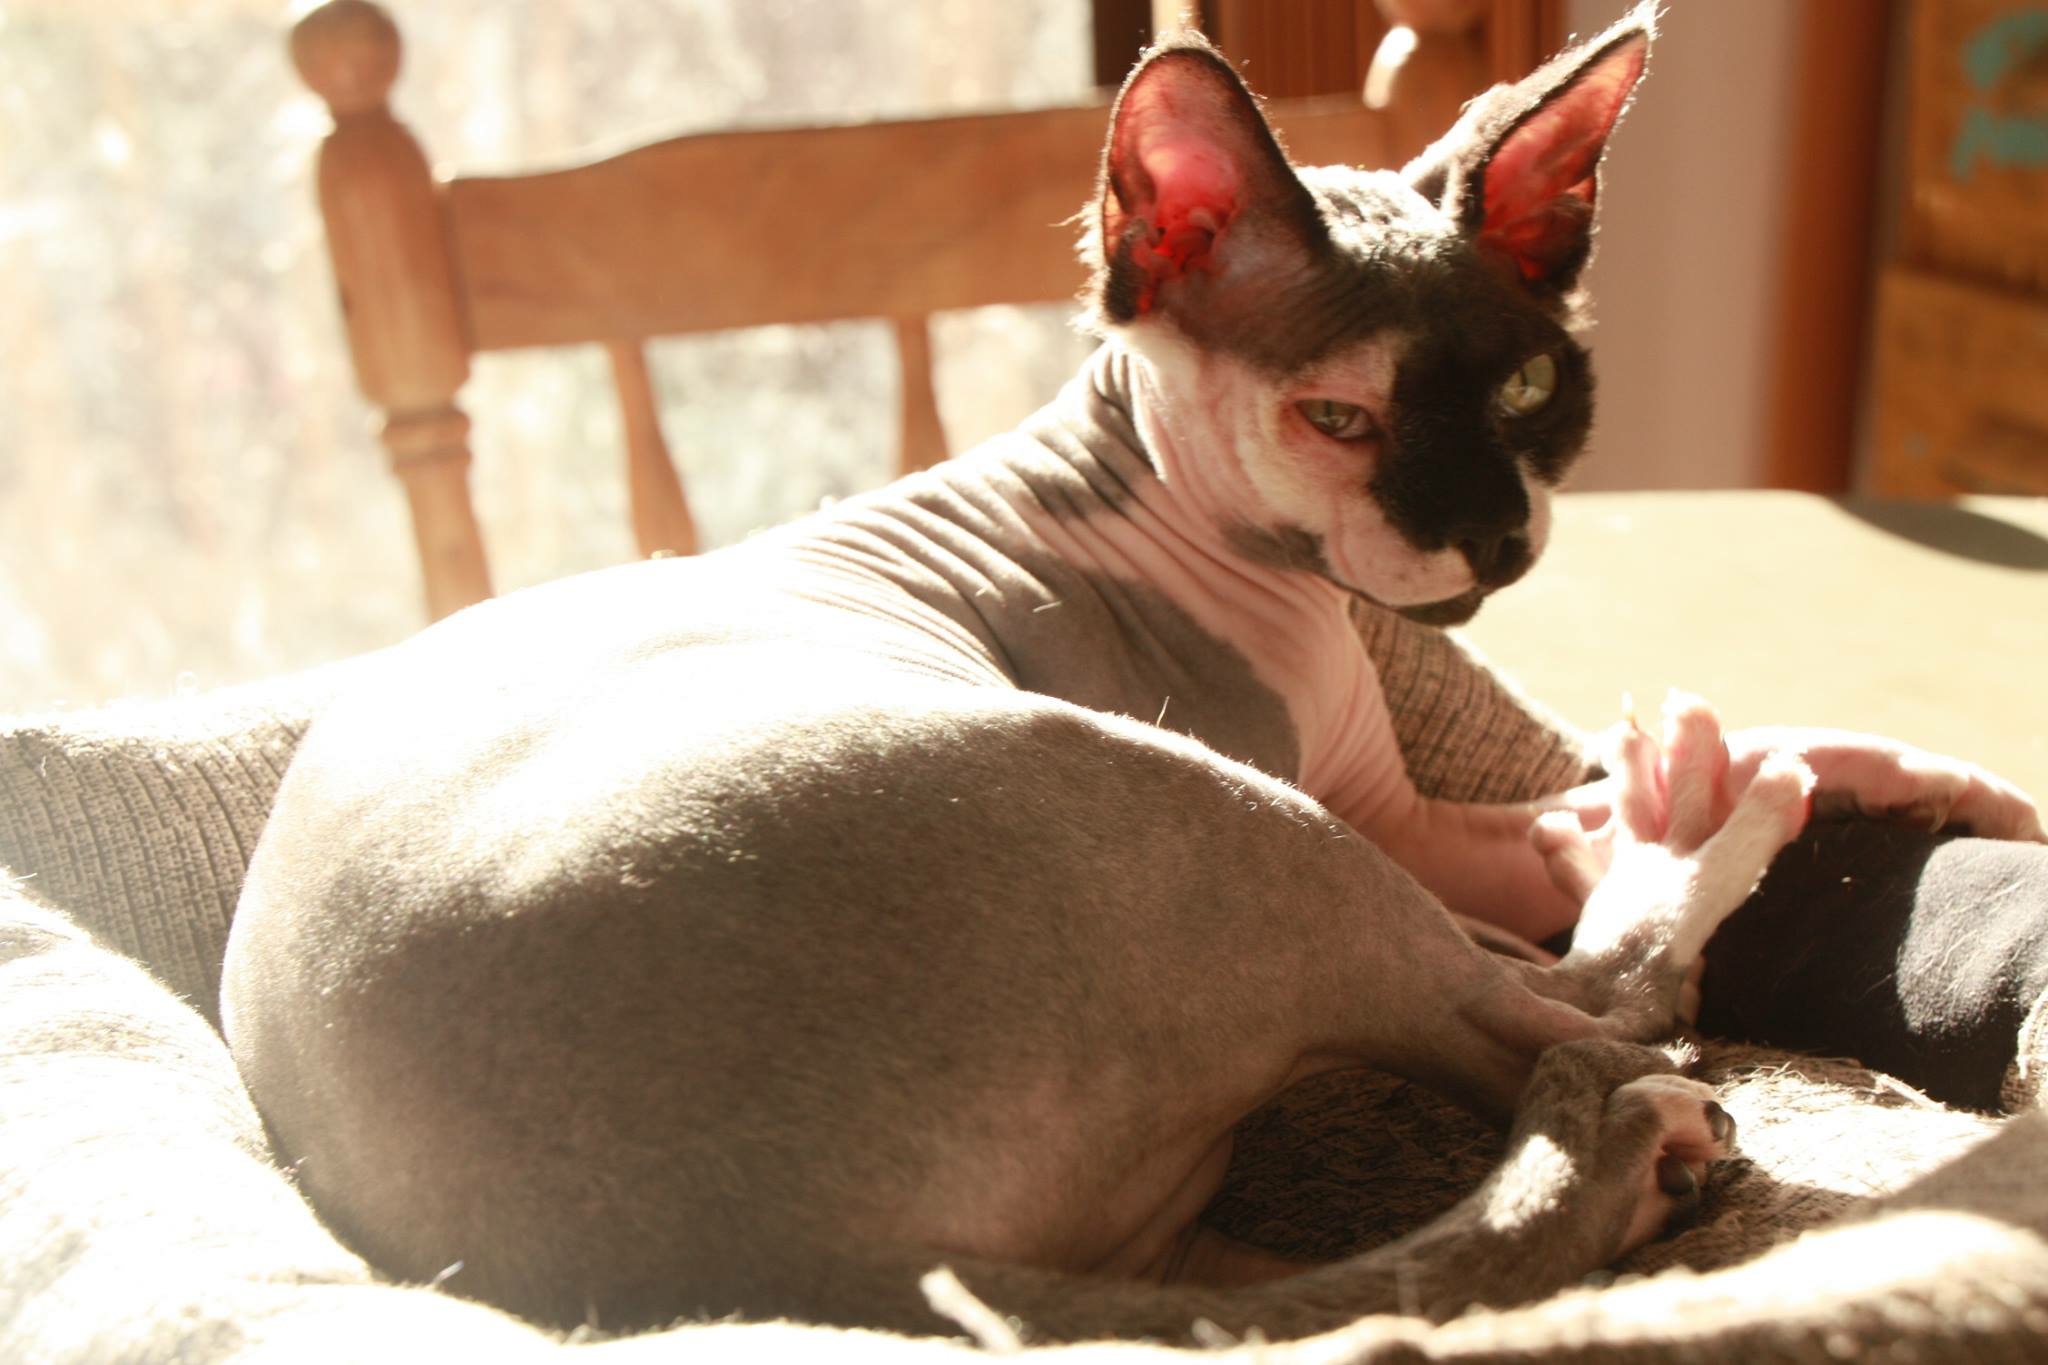 Sphynx and your Average beautiful cat